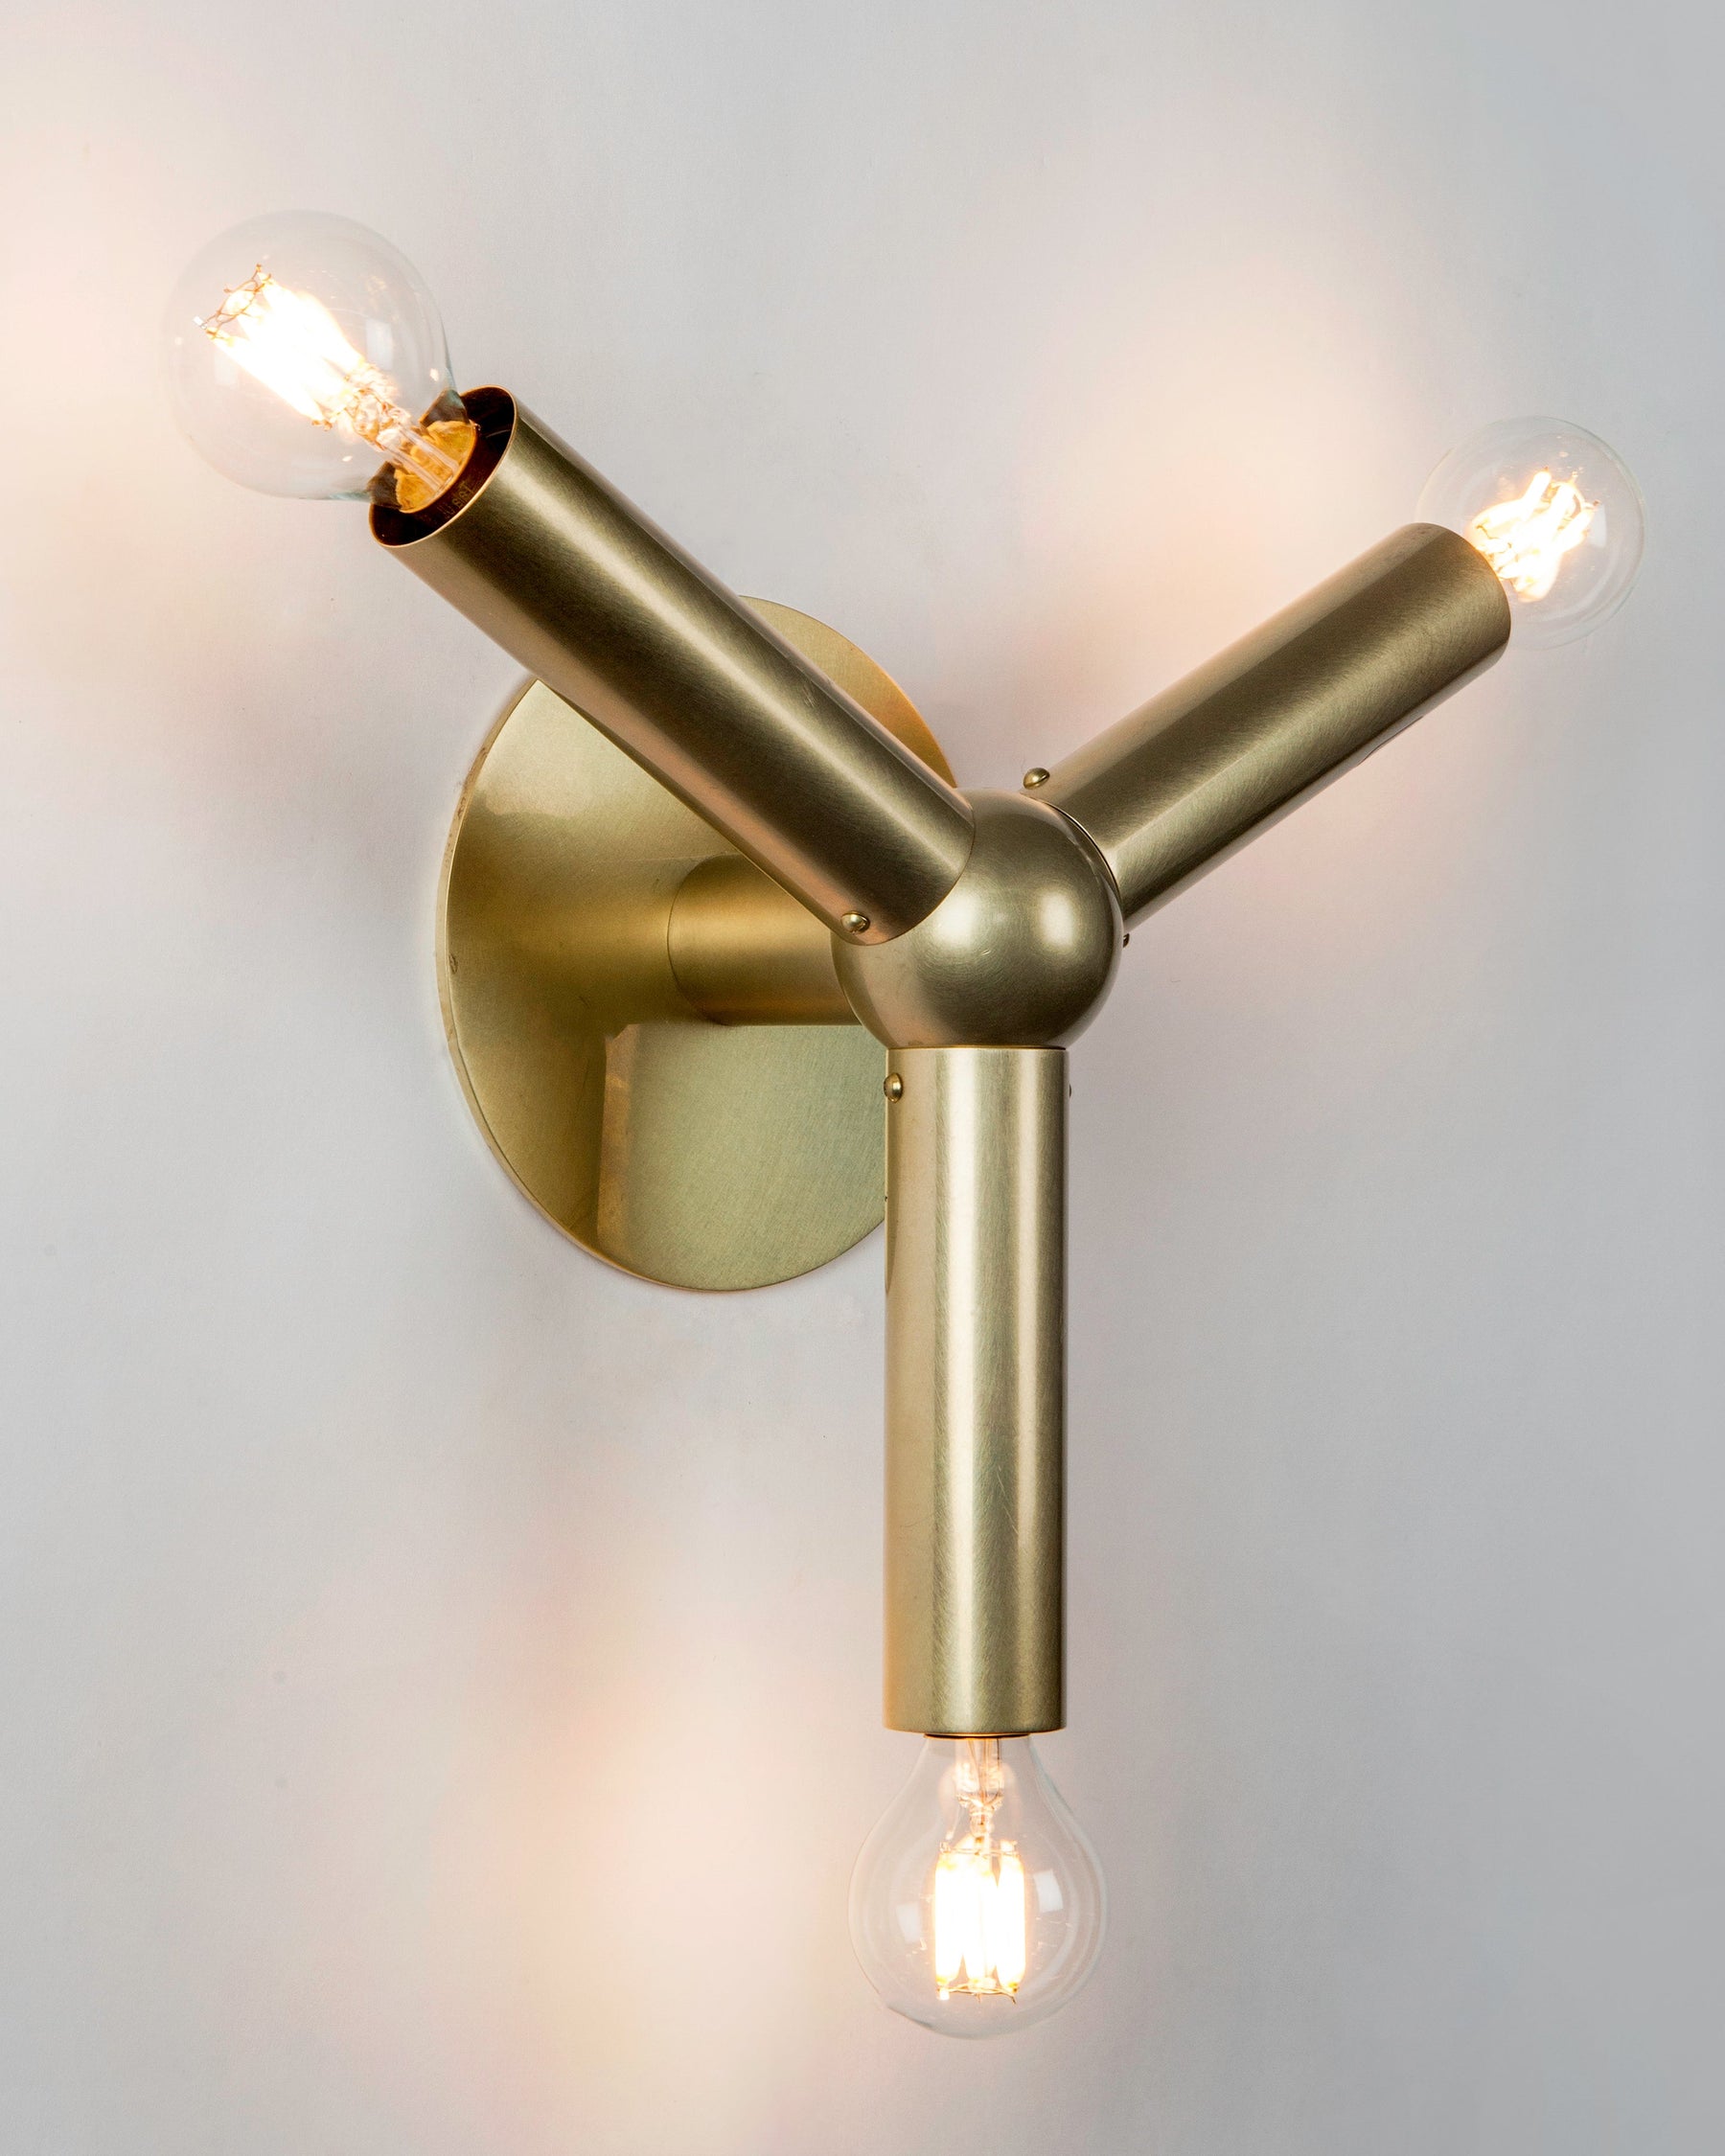 The polished brass Molecule Wall Sconce from the lighting collection by Swiss architects Robert and Trix Haussmann features a solid brass central sphere and three round bar arms, inspired by their original midcentury Atomic Lichtstruktur designs.